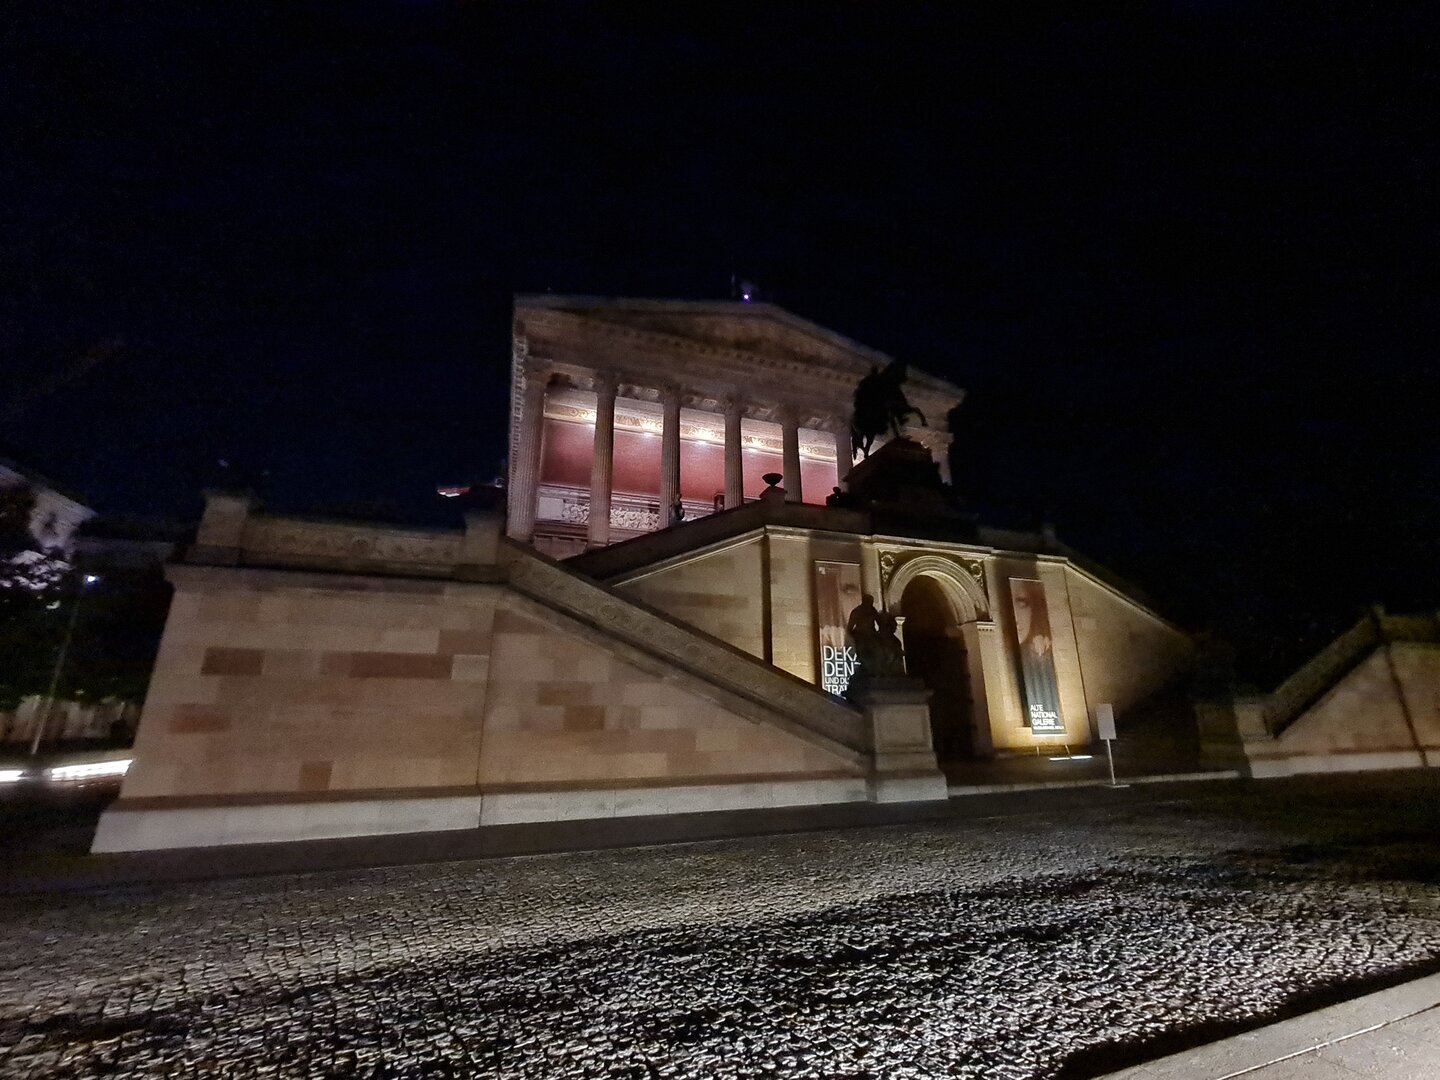 Galaxy Note 20 Ultra (f/2.2, ISO 2500, 1/11 s)